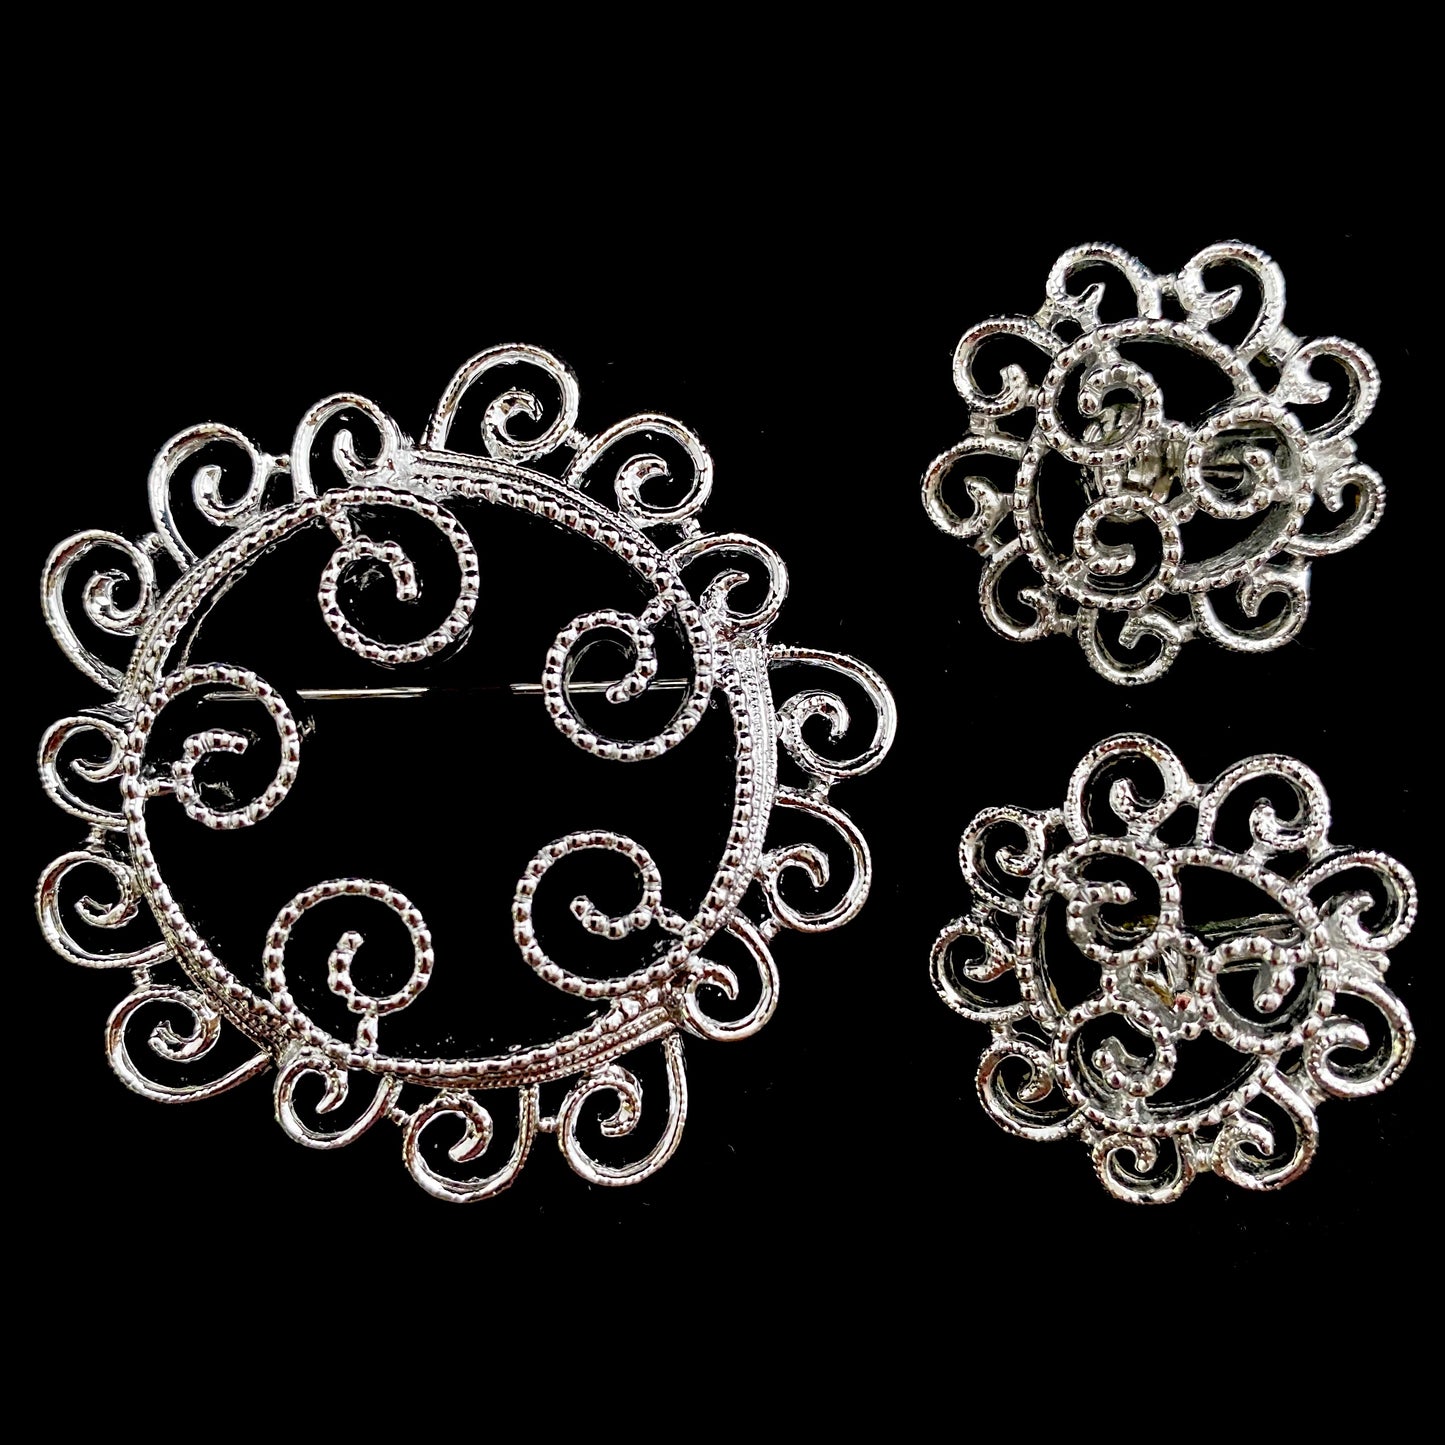 1971 Sarah Coventry Silvery Mist Brooch & Earring Set - Retro Kandy Vintage